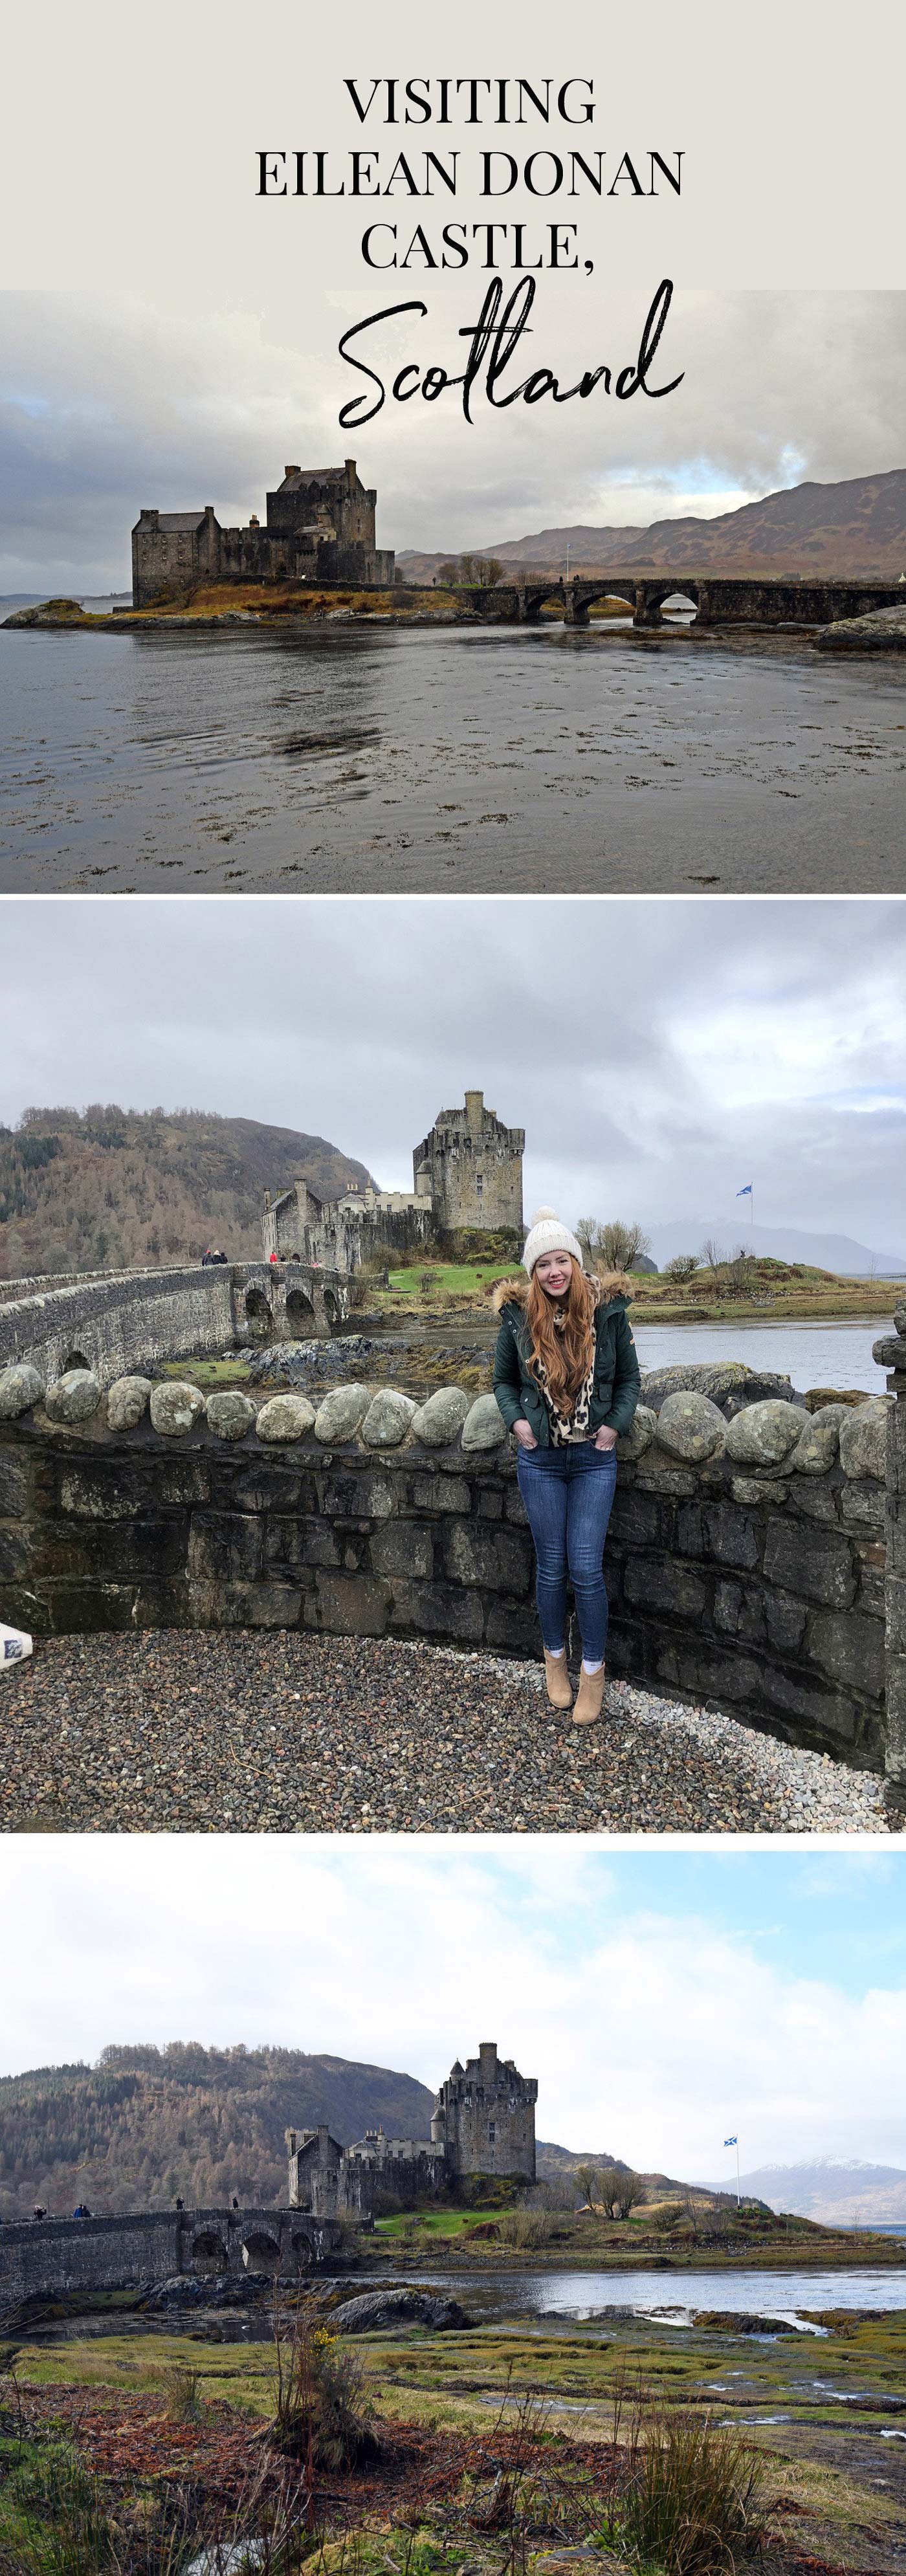 Visiting one of Scotland's top tourist destinations: Eilean Donan Castle, in the Highlands